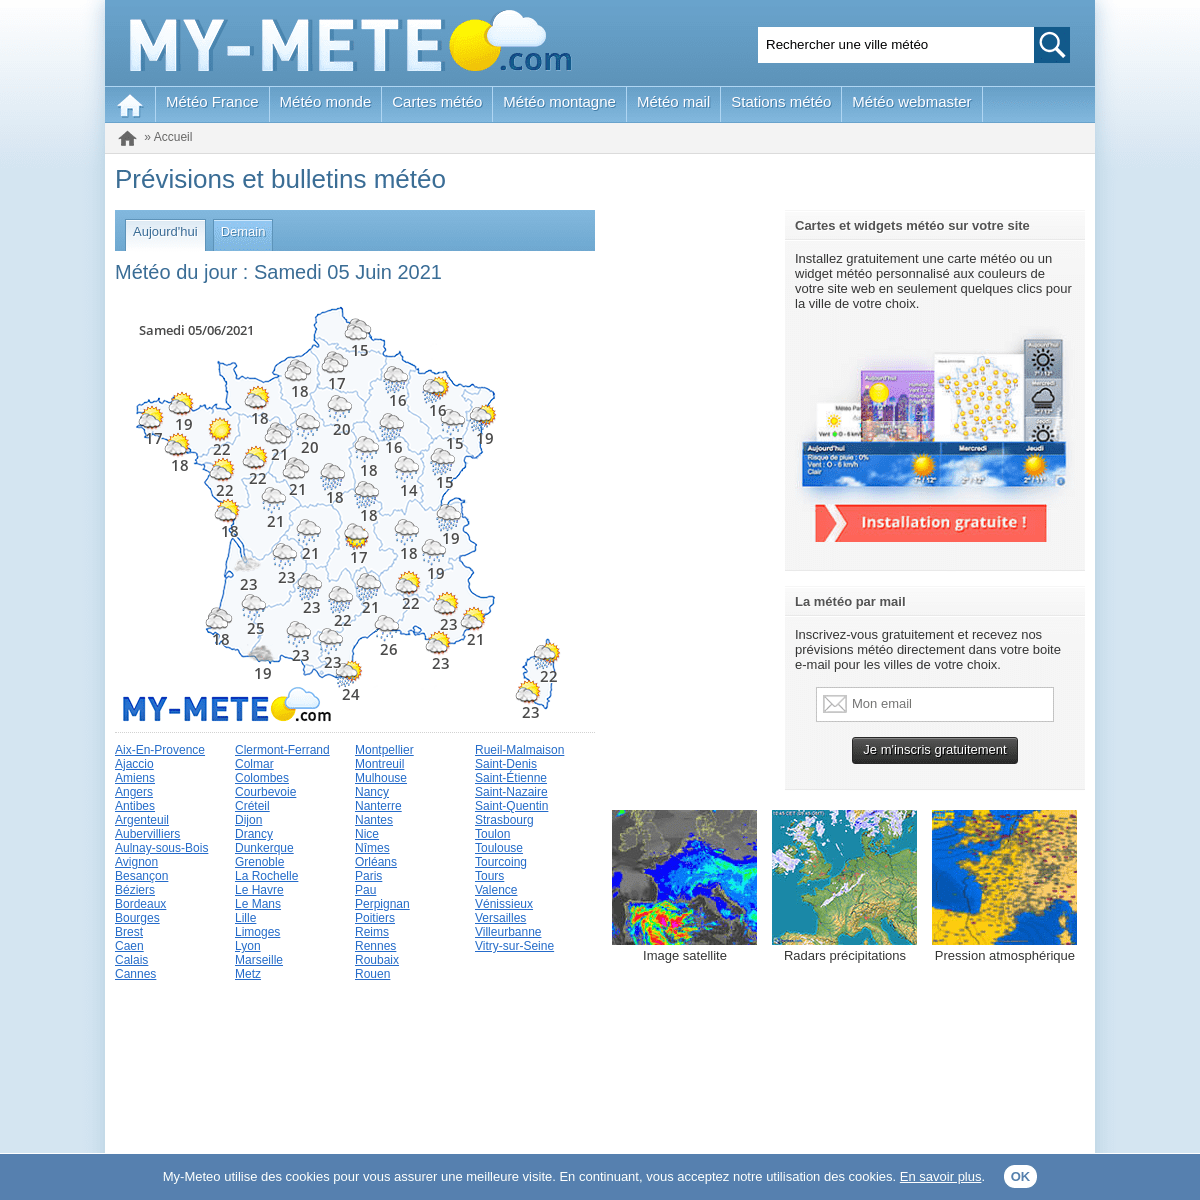 A complete backup of https://my-meteo.com